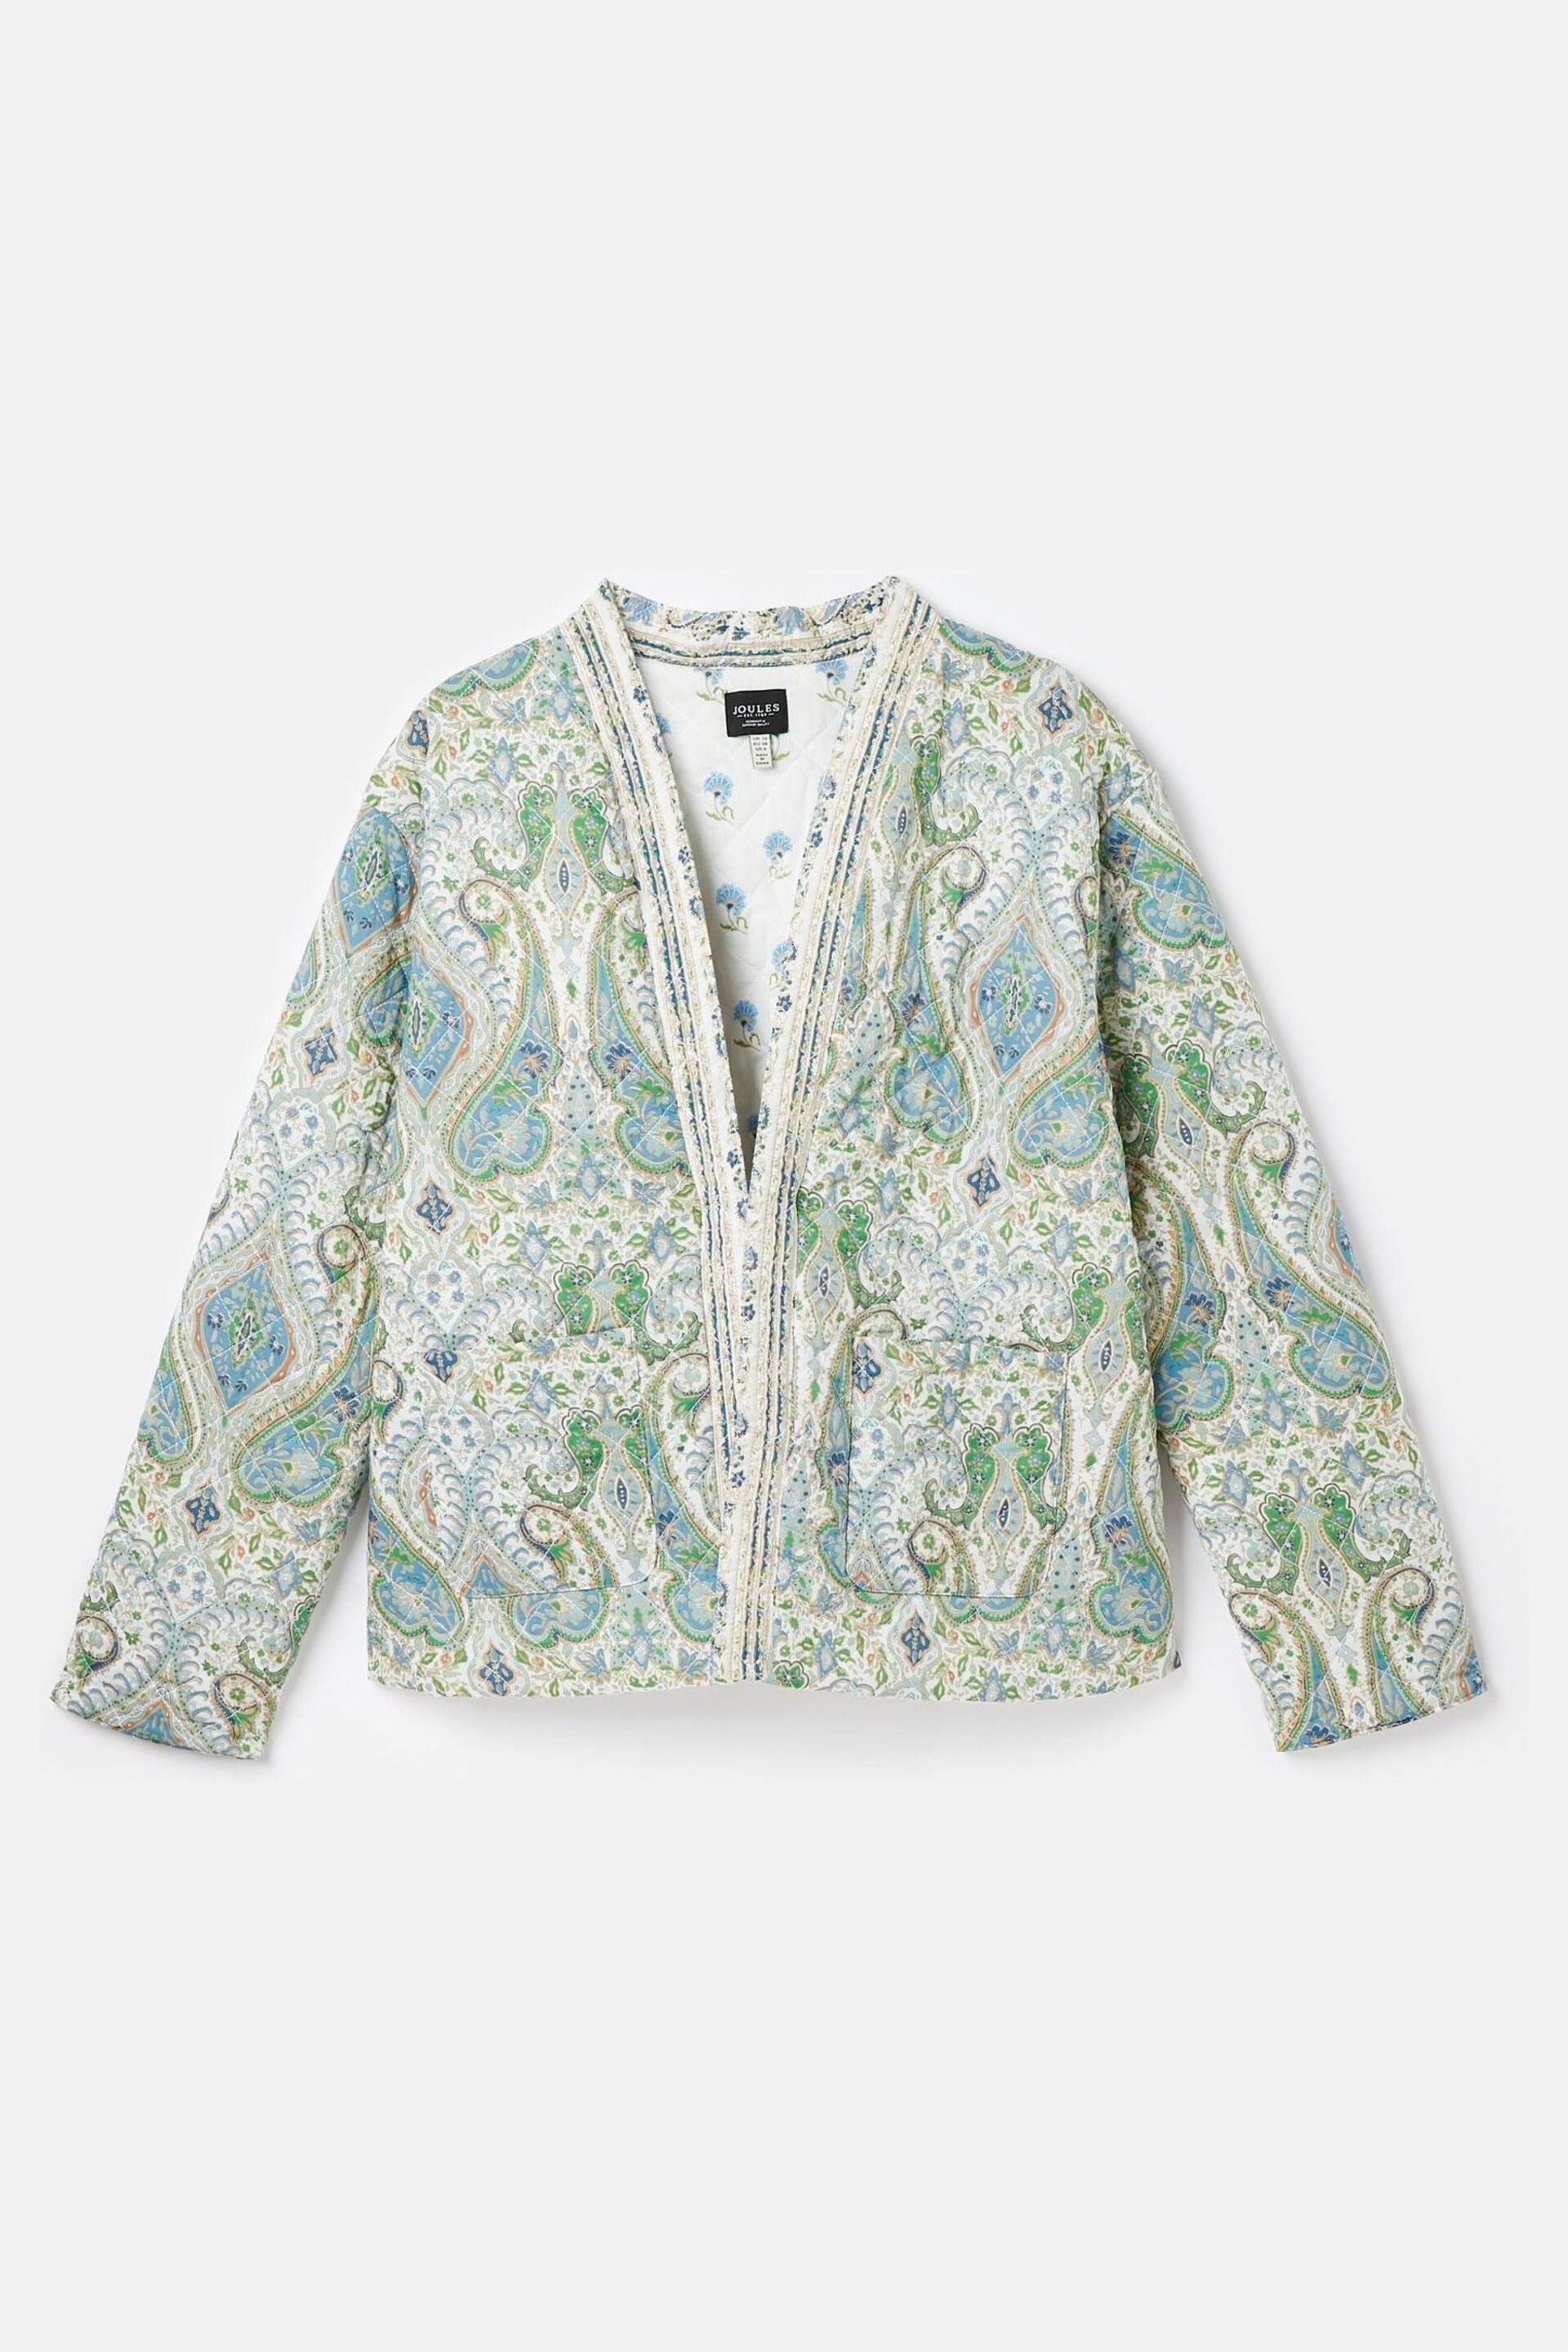 Joules Blakeney Relaxed Fit Paisley Cotton Quilted Jacket - Image 7 of 8